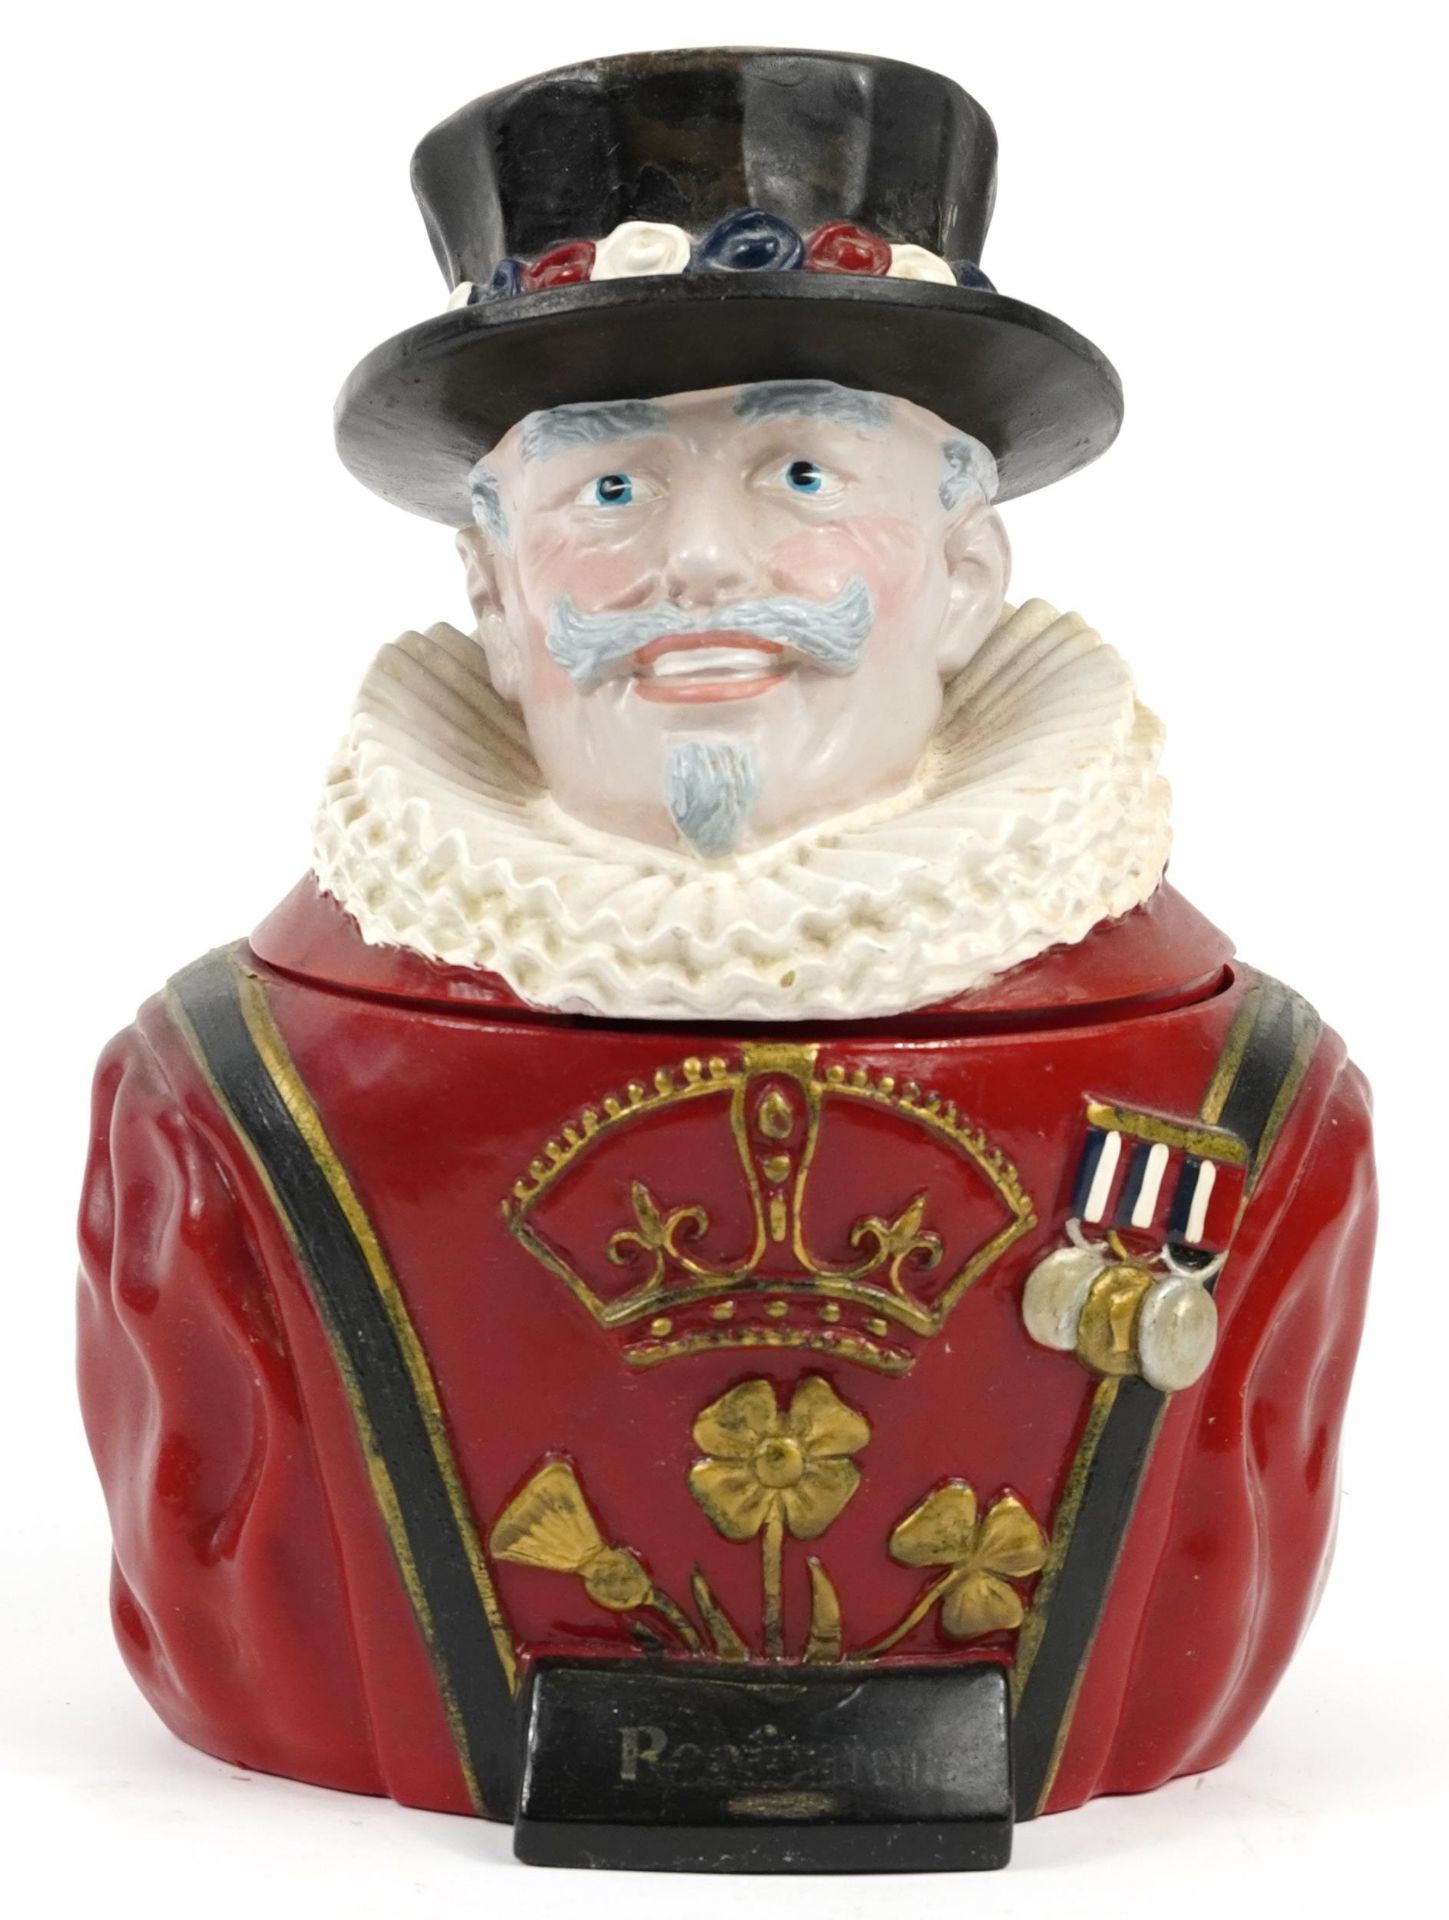 Vintage Rubberoid ice bucket in the form of a Beefeater, 27.5cm high : For further information on